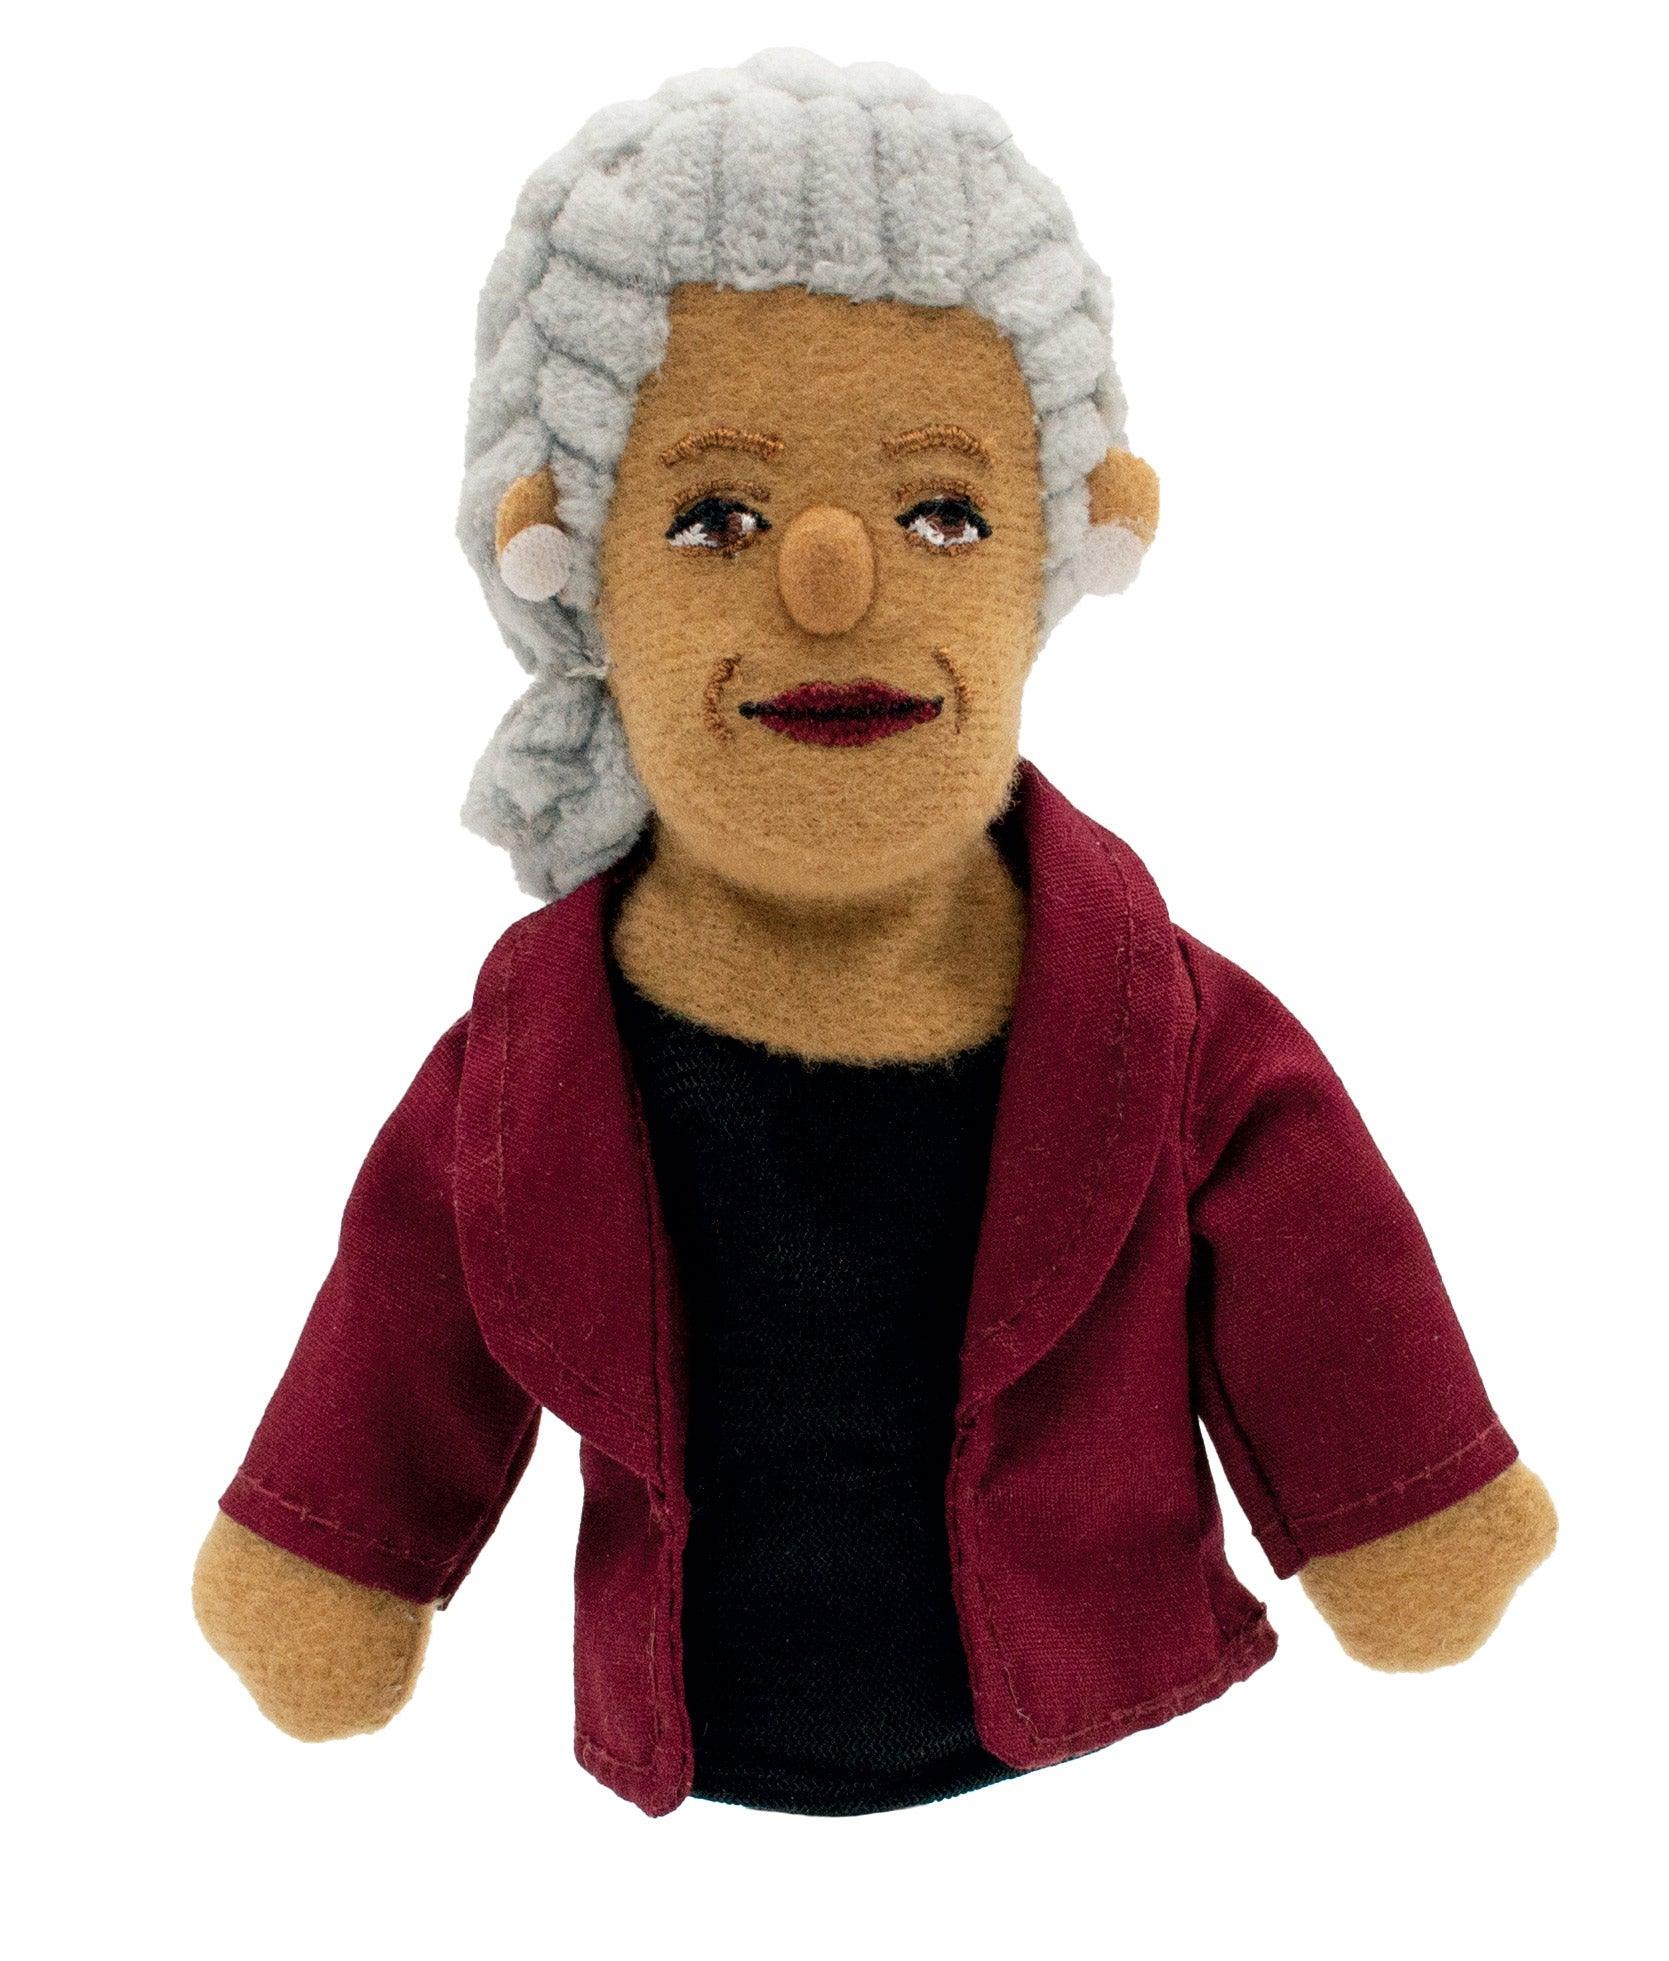 Product photo of Toni Morrison Finger Puppet, a novelty gift manufactured by The Unemployed Philosophers Guild.